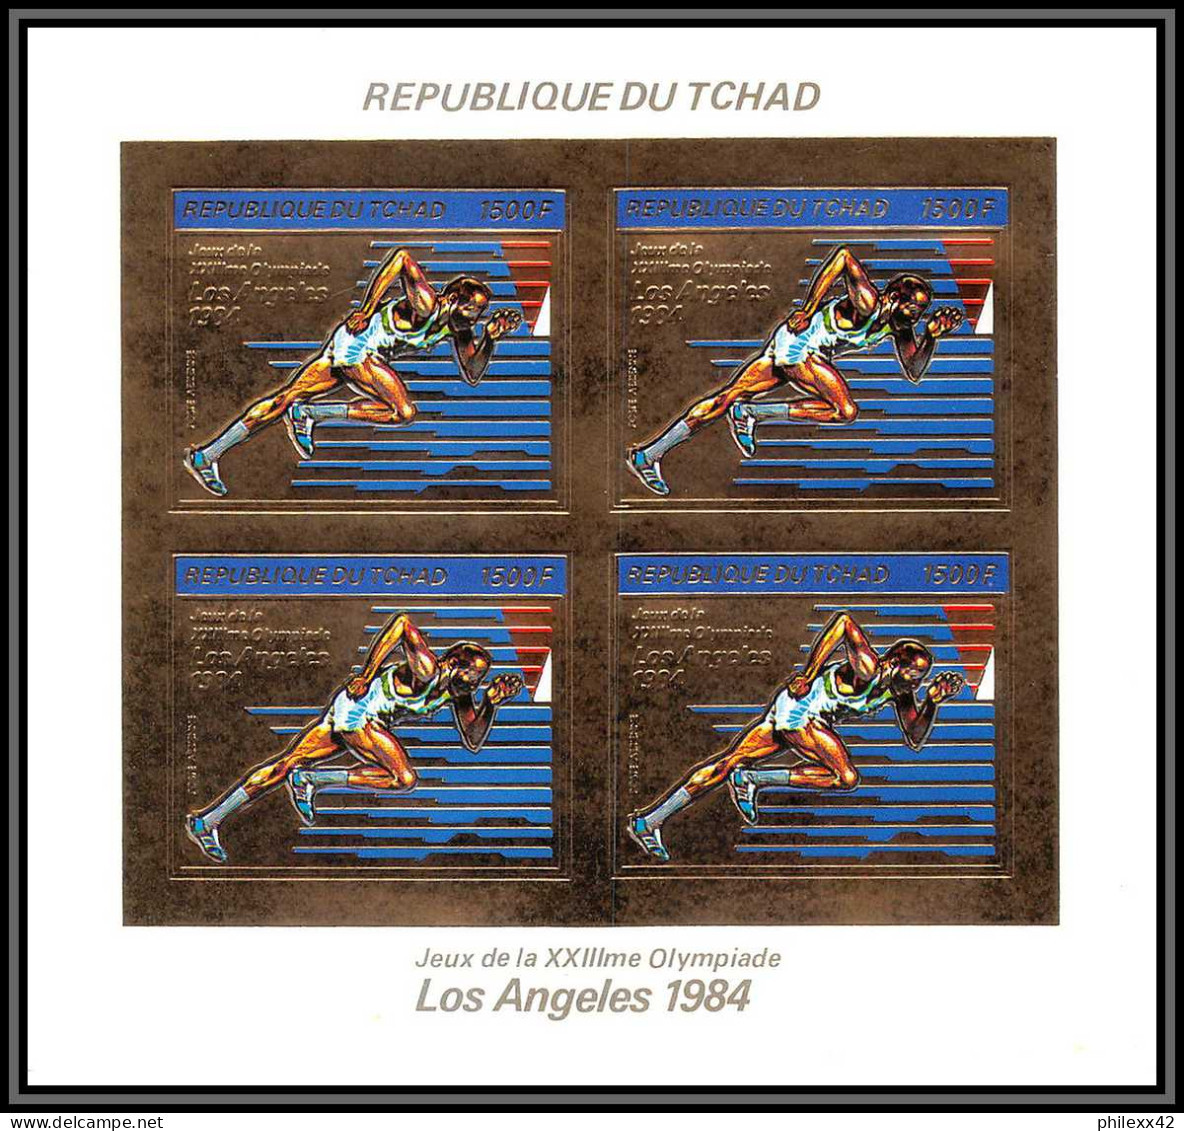 85896/ N°924 B Los Angeles 1984 Jeux Olympiques Olympic Games Tchad OR Gold ** MNH Bloc 4 Non Dentelé Imperf - Chad (1960-...)